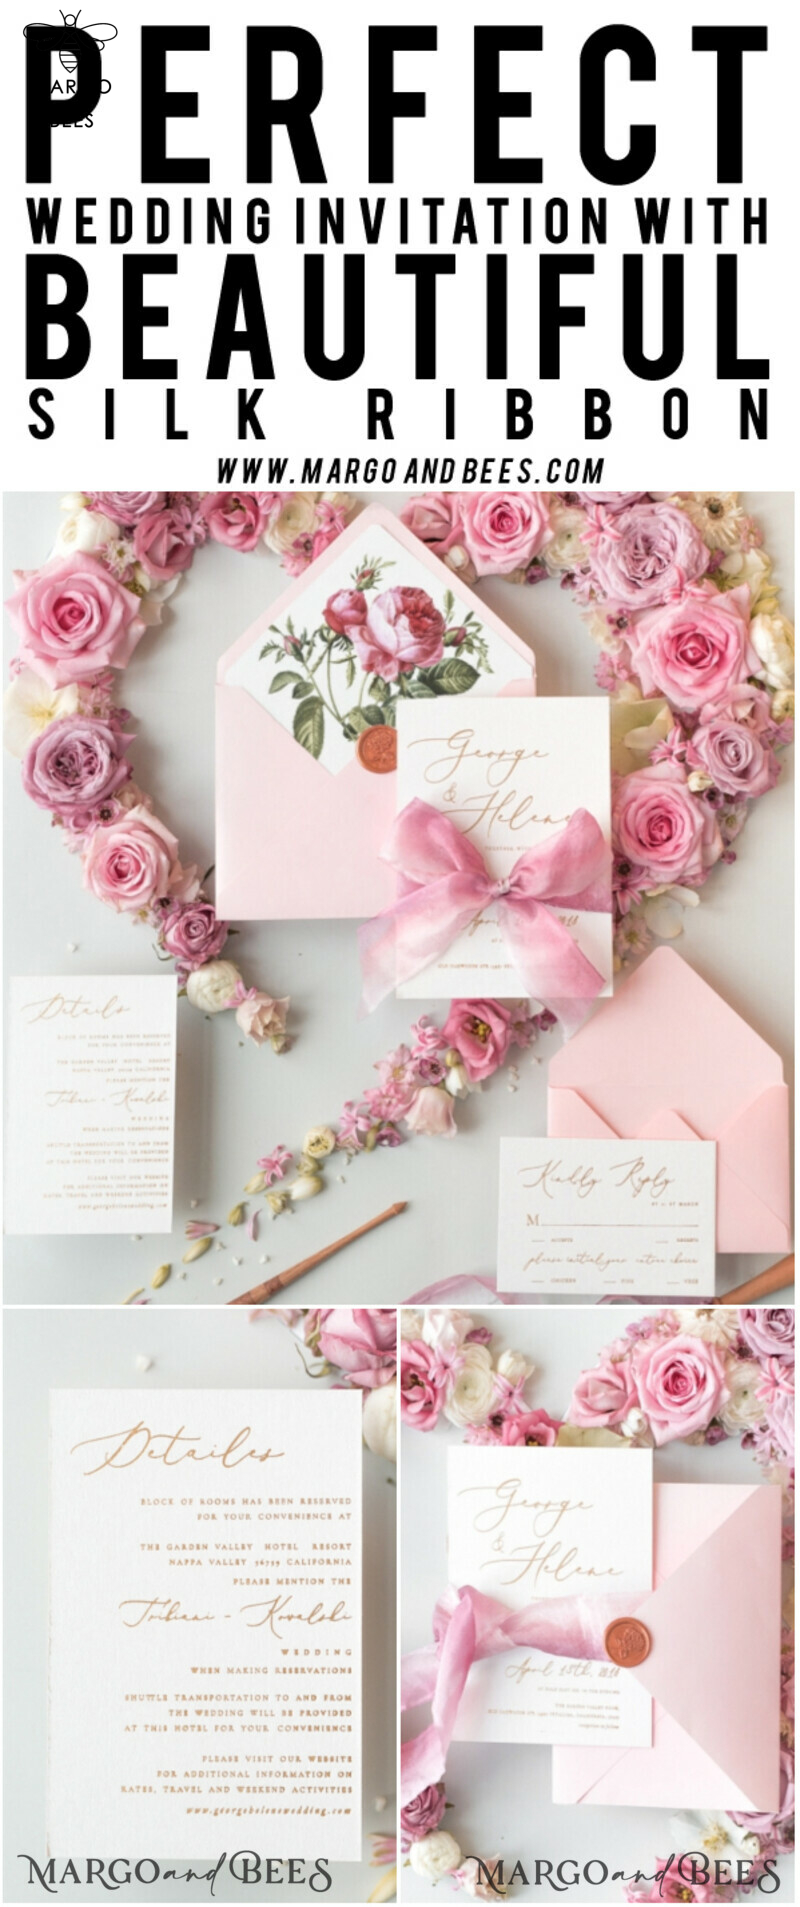 Elegant Personalized Wedding Invitations Romantic Stationery with Vintage Garden Roses and  Handmade Silk Bow Gold Foil Letters  Blush Pink Envelope -42